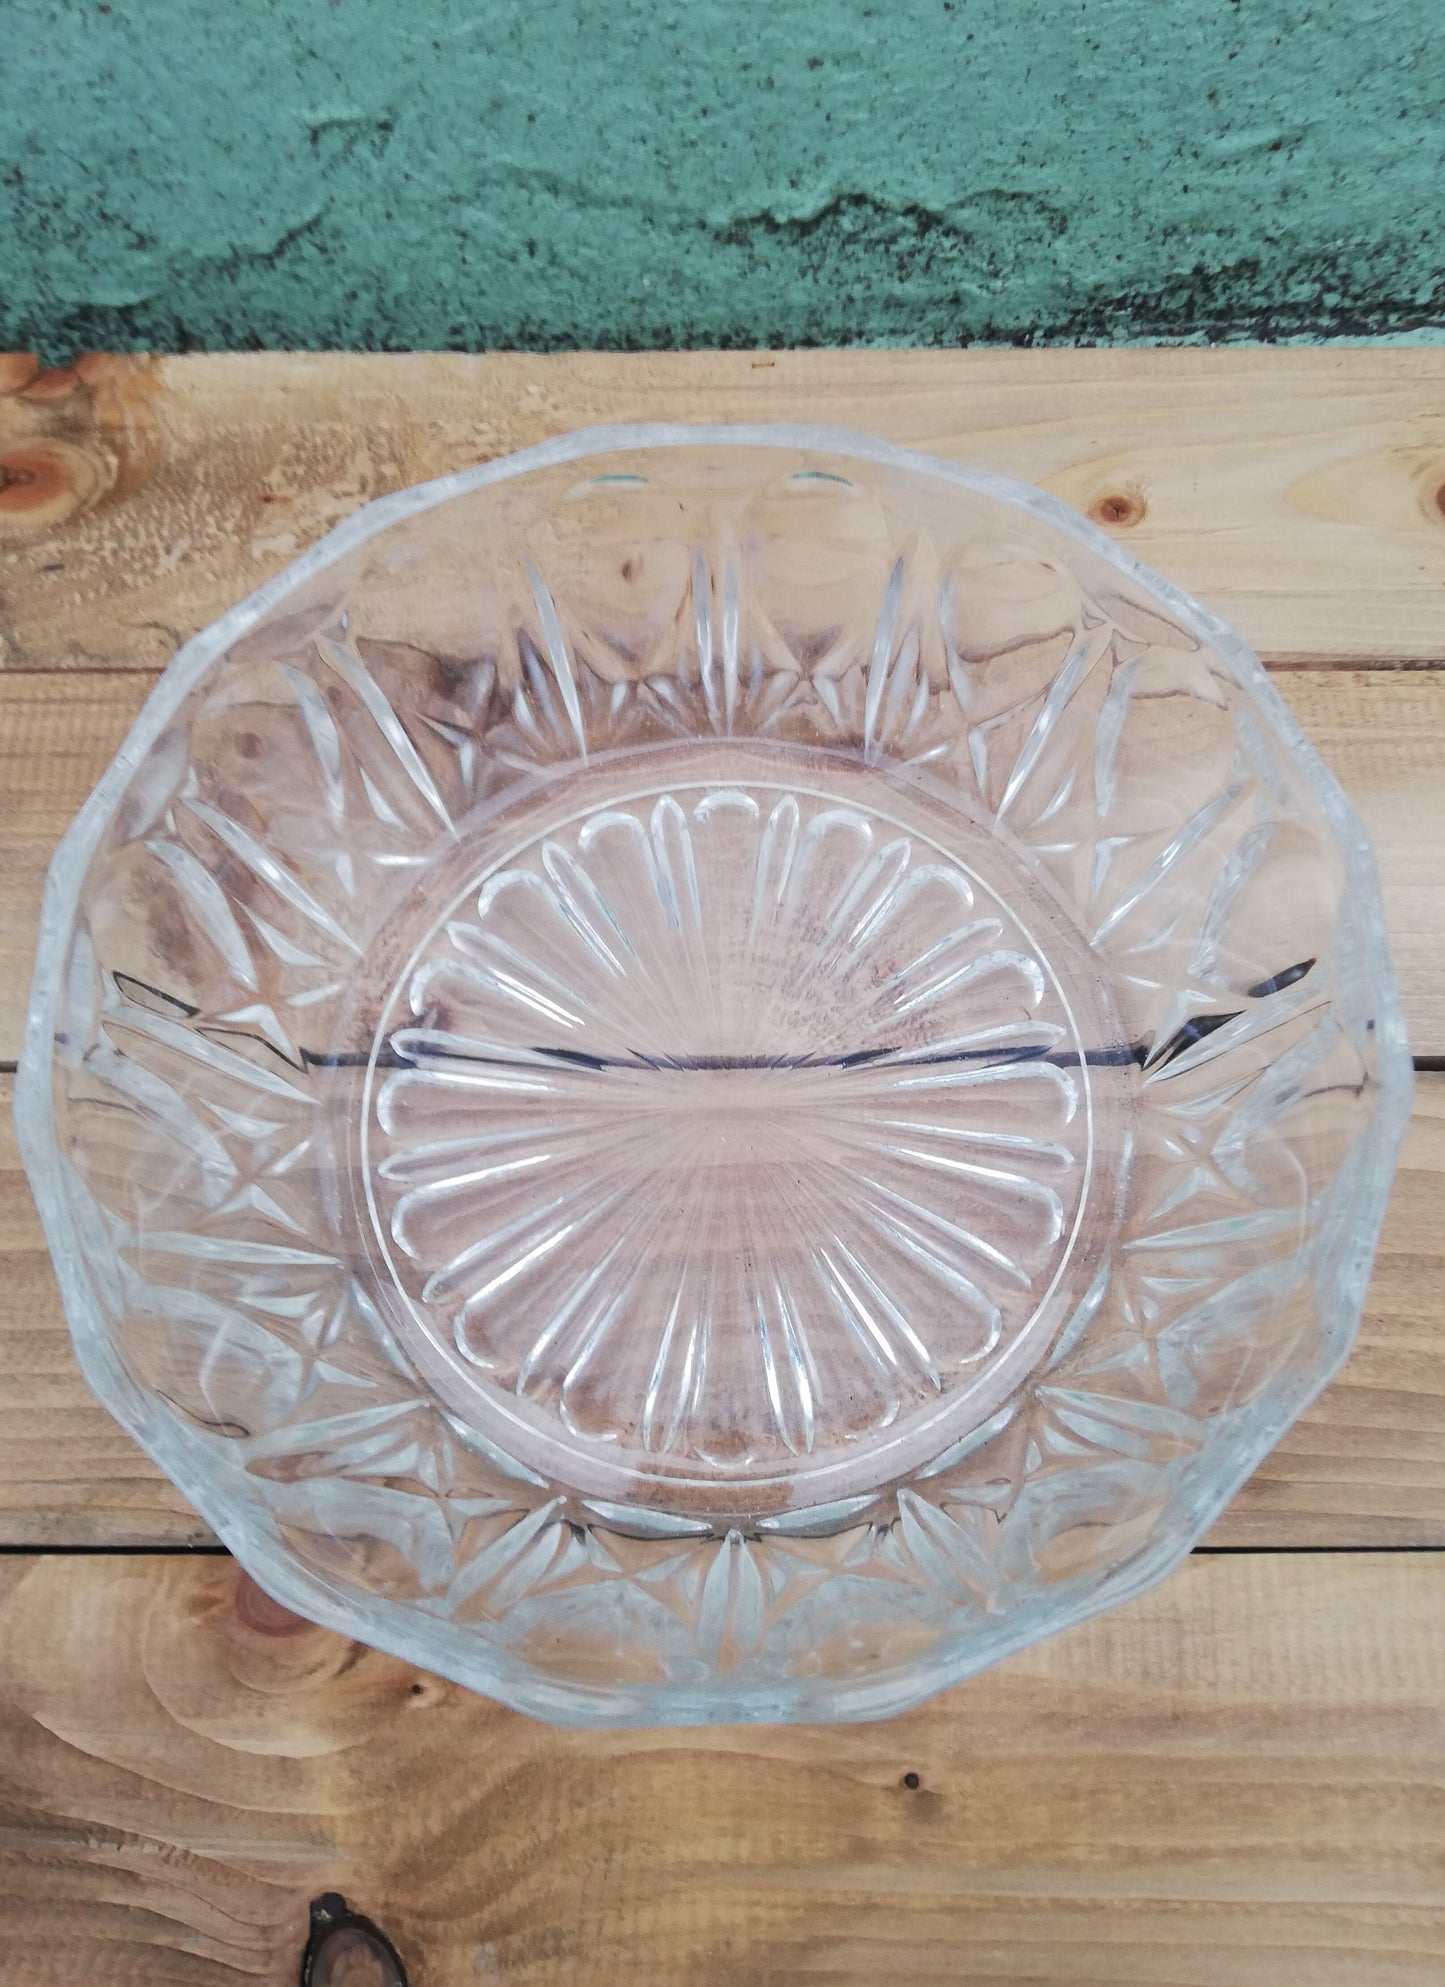 Collection of cut glass bowls